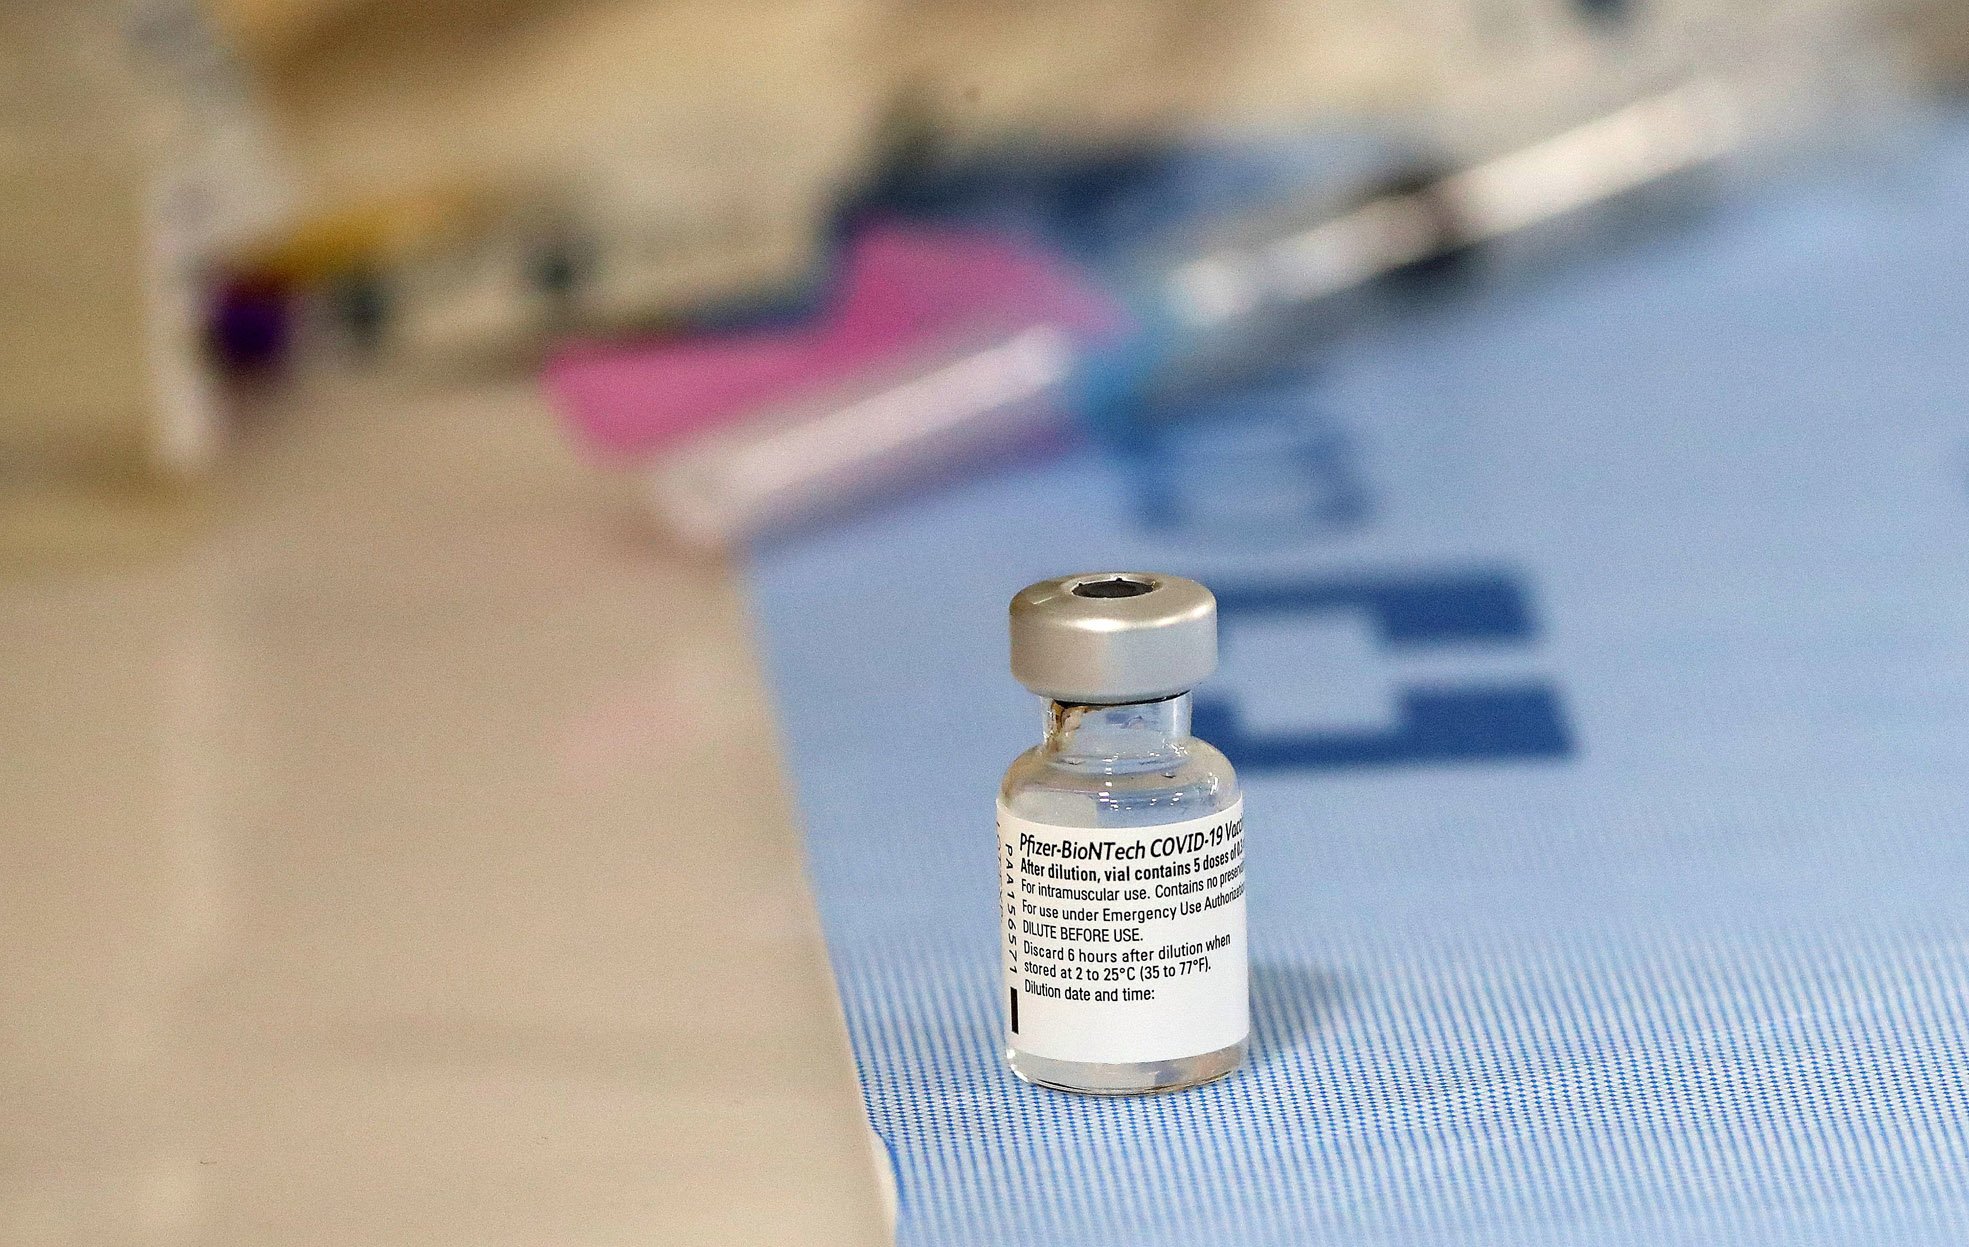 Ontario unlikely to mandate vaccination of workers: expert